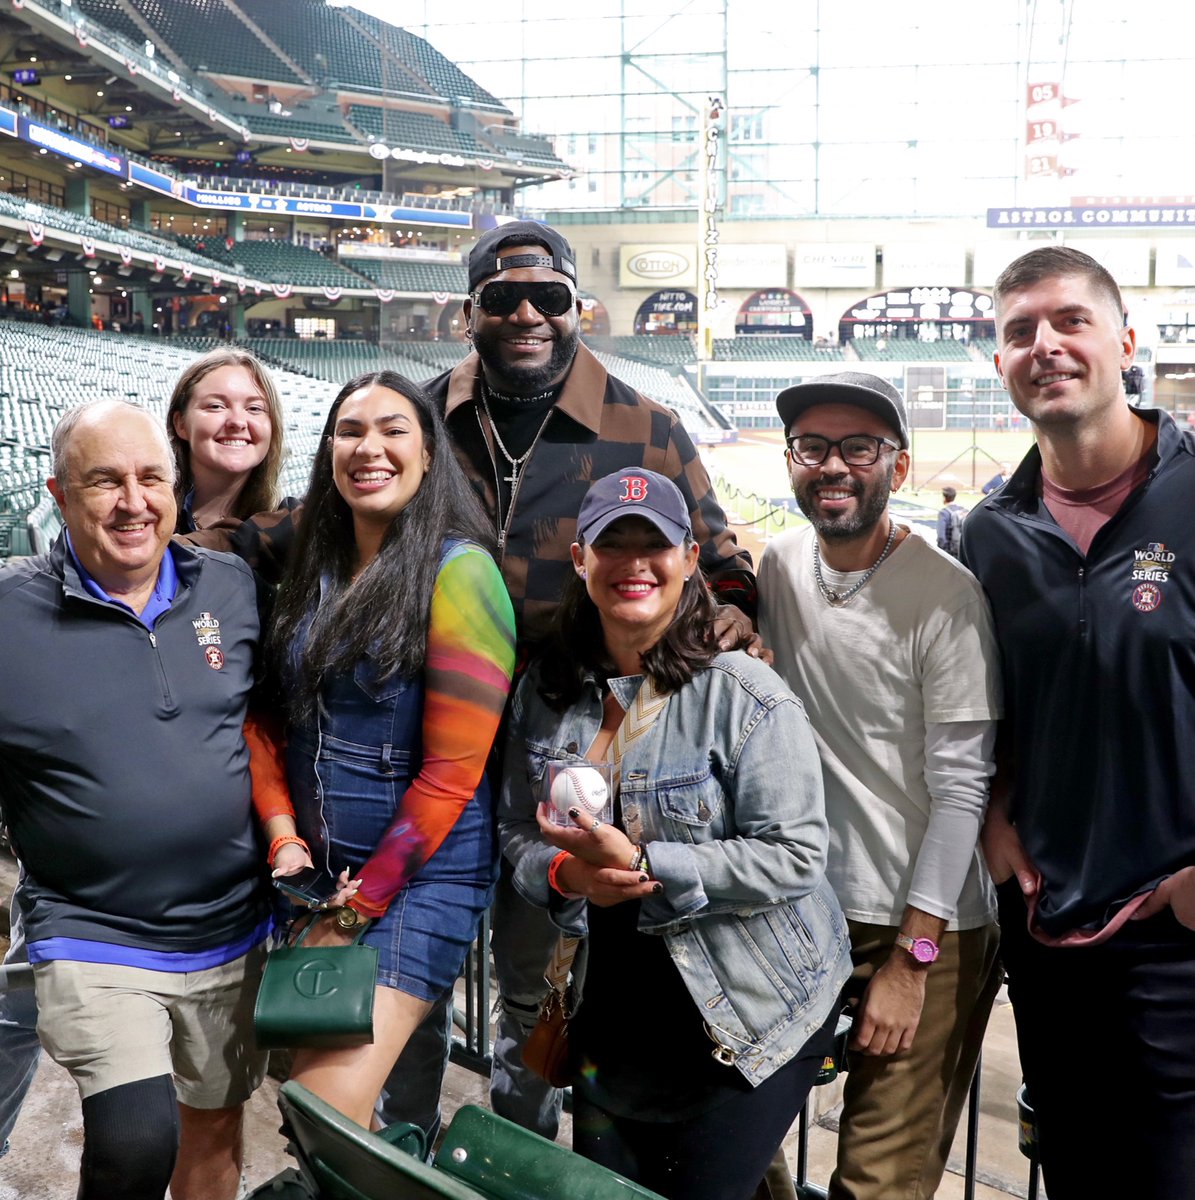 After using their Mastercard in the Uber app, these fans found out they won a trip to the @MLB World Series presented by Capital One! We had a great time hanging out too. A #Priceless experience from @Mastercard and @Uber. #MastercardAmbassador. ⚾ 🚗